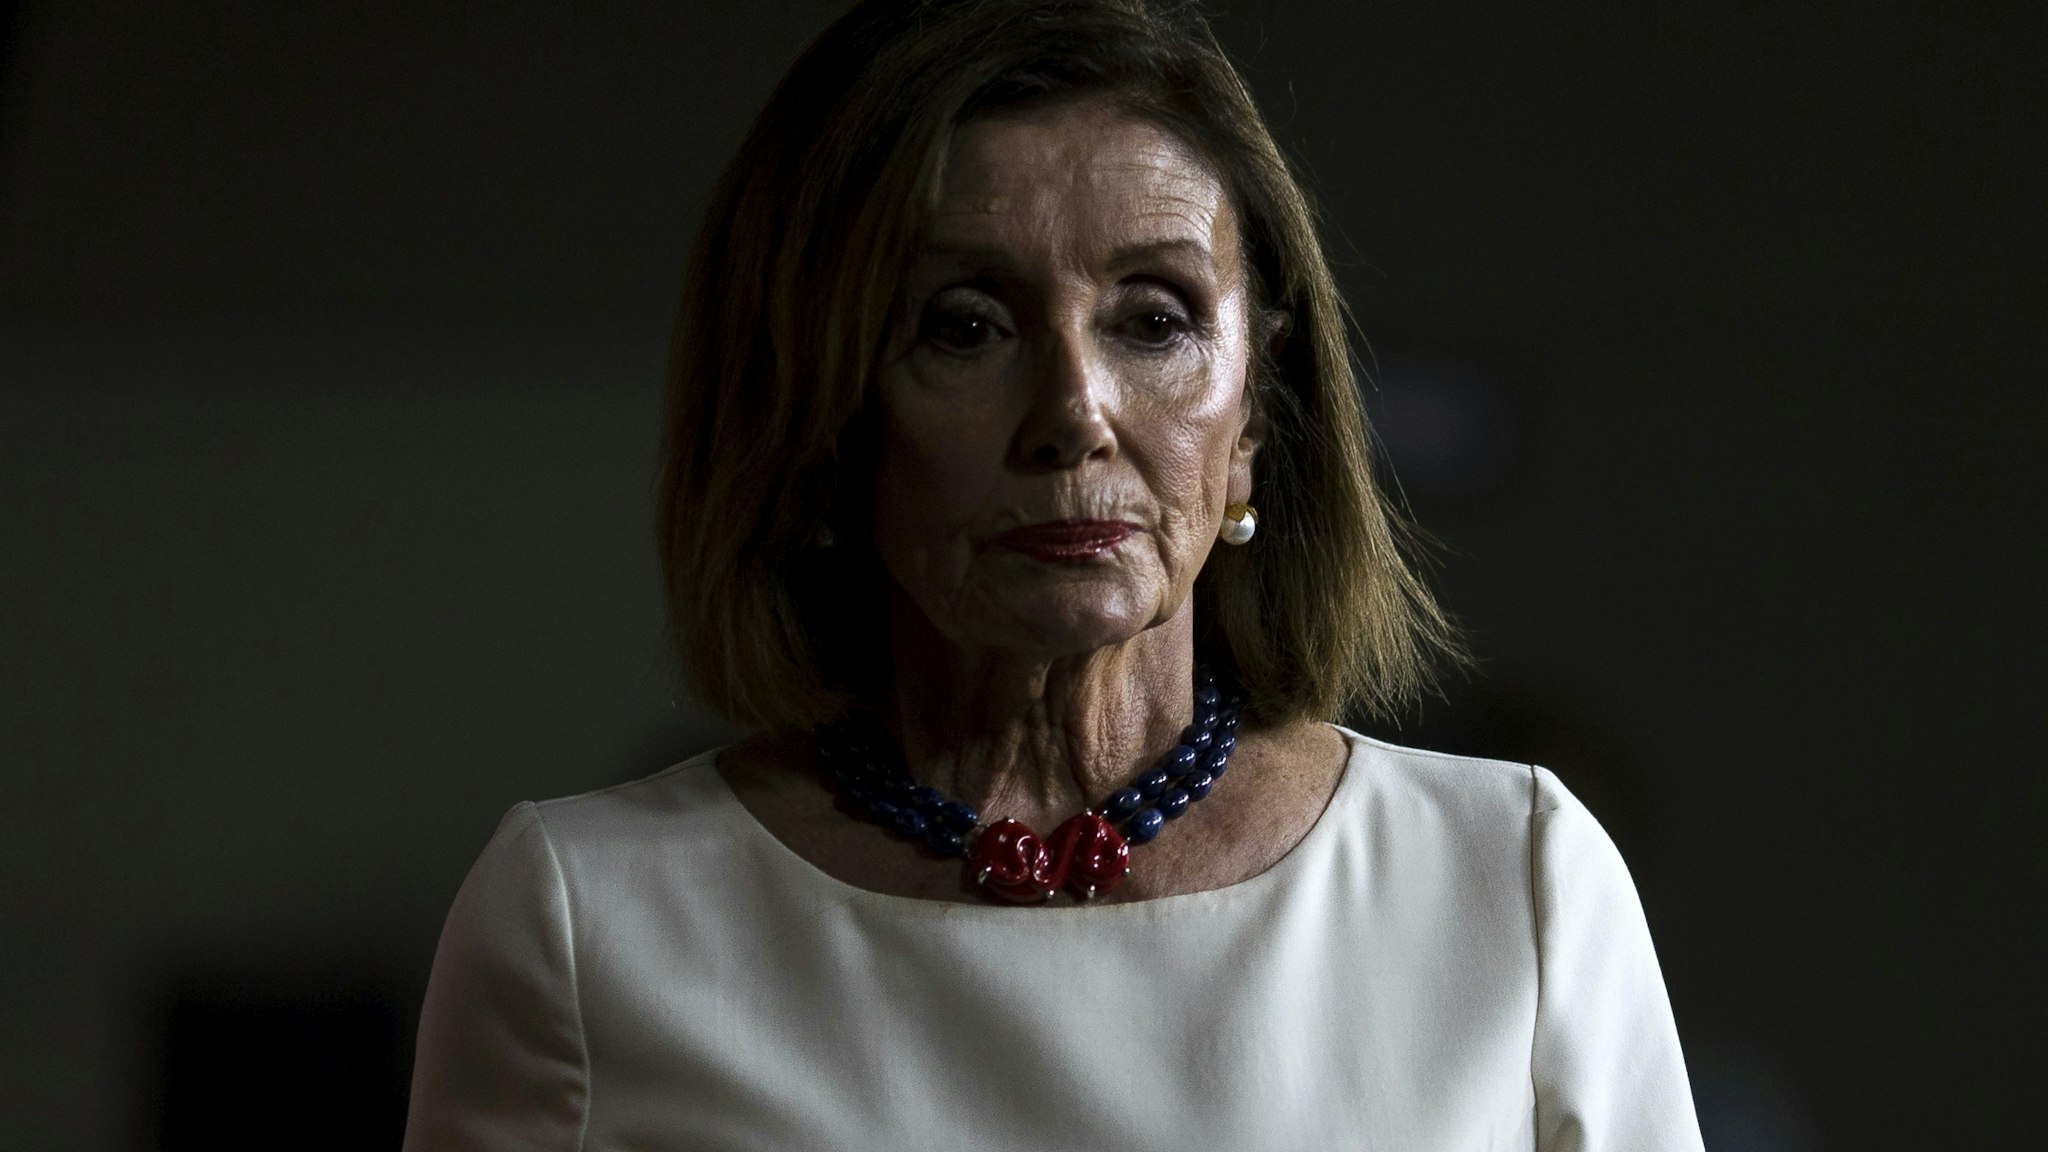 WASHINGTON, DC - SEPTEMBER 26: House Speaker Nancy Pelosi (D-CA) speaks during a weekly news conference on Capitol Hill on September 26, 2019 in Washington, DC. Speaker Pelosi discussed an impeachment inquiry into President Donald Trump.